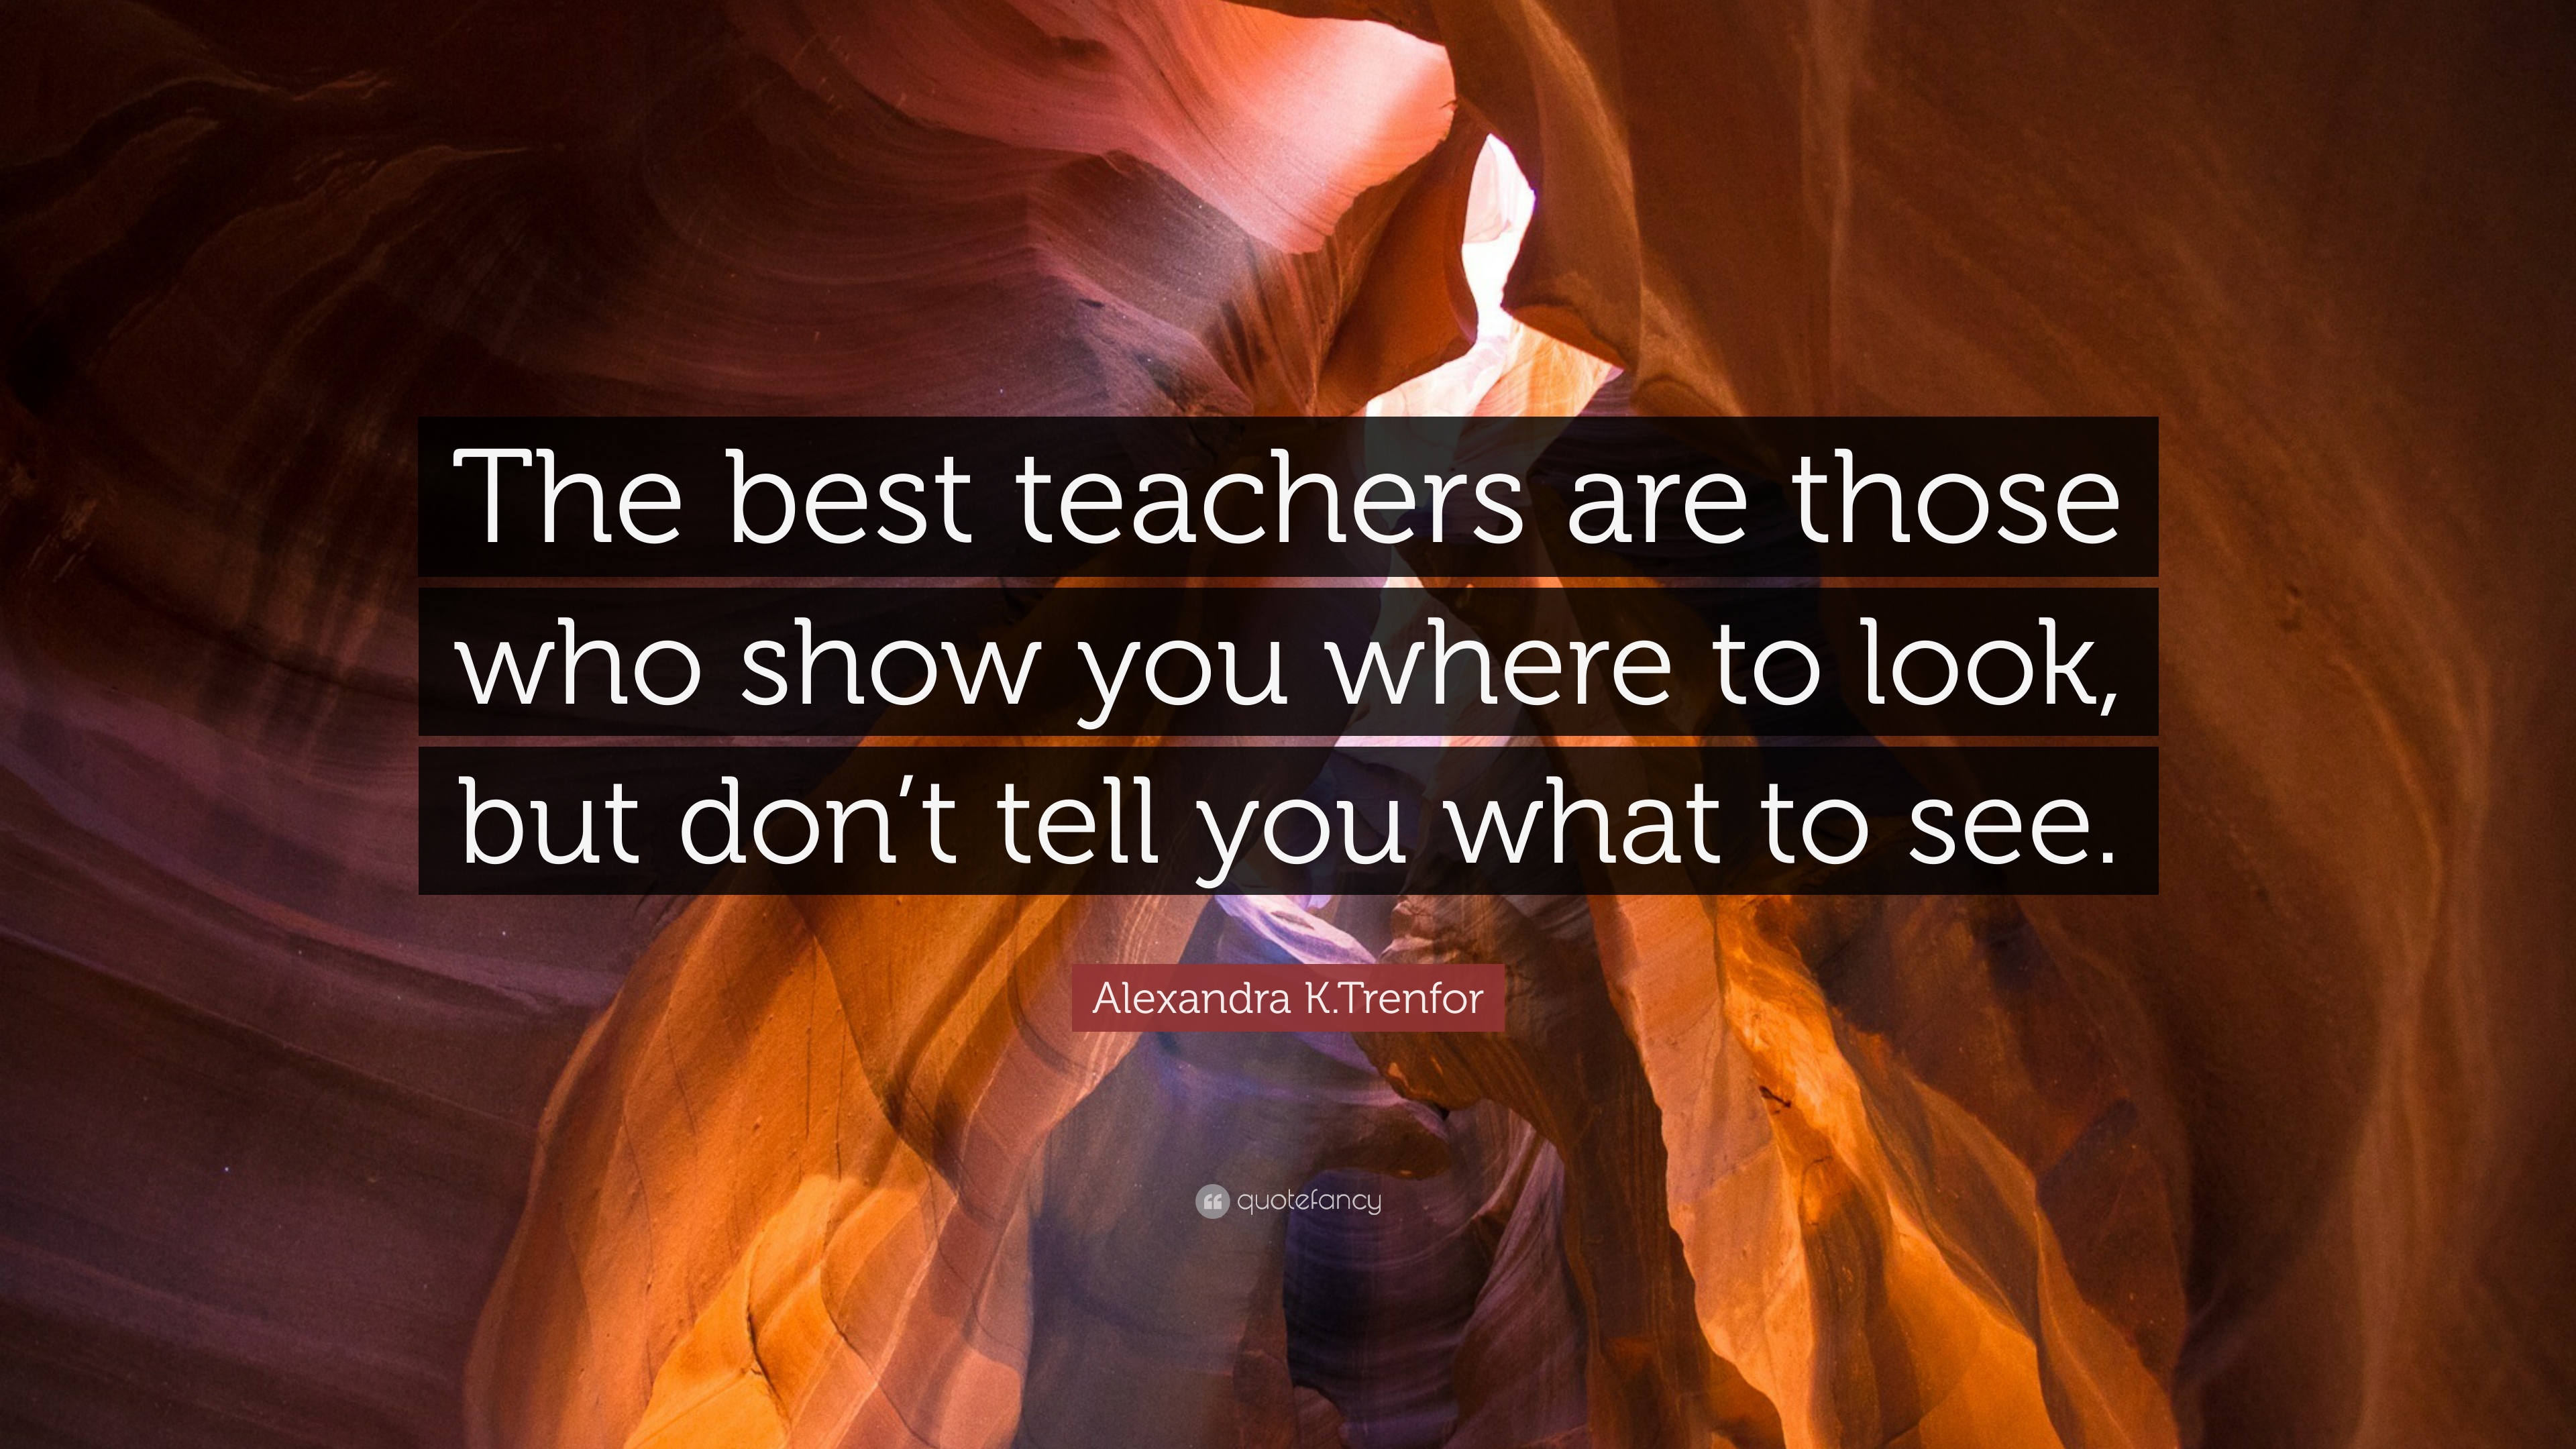 Alexandra K Trenfor Quote The best teachers are those who show you